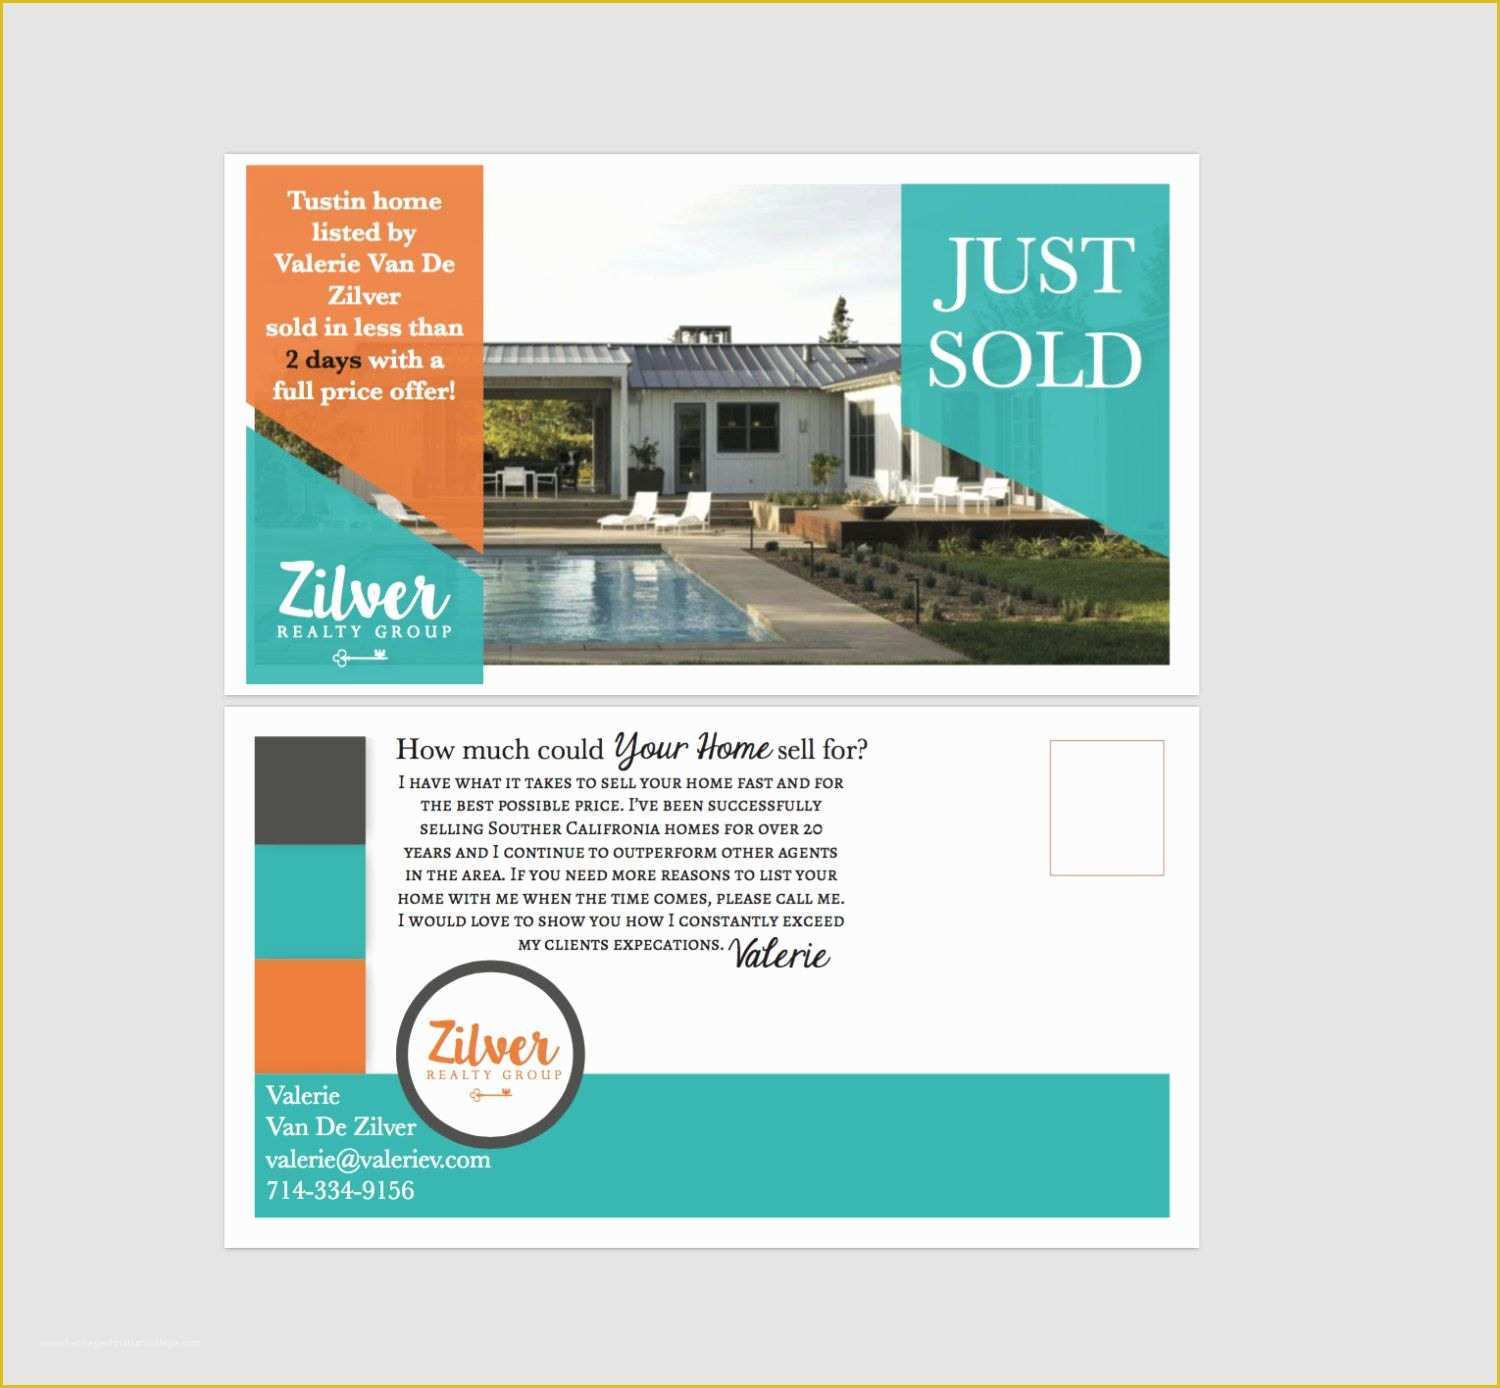 Just sold Postcard Templates Free Of Real Estate Just sold Flyer Templates Yourweek 00f7eeeca25e